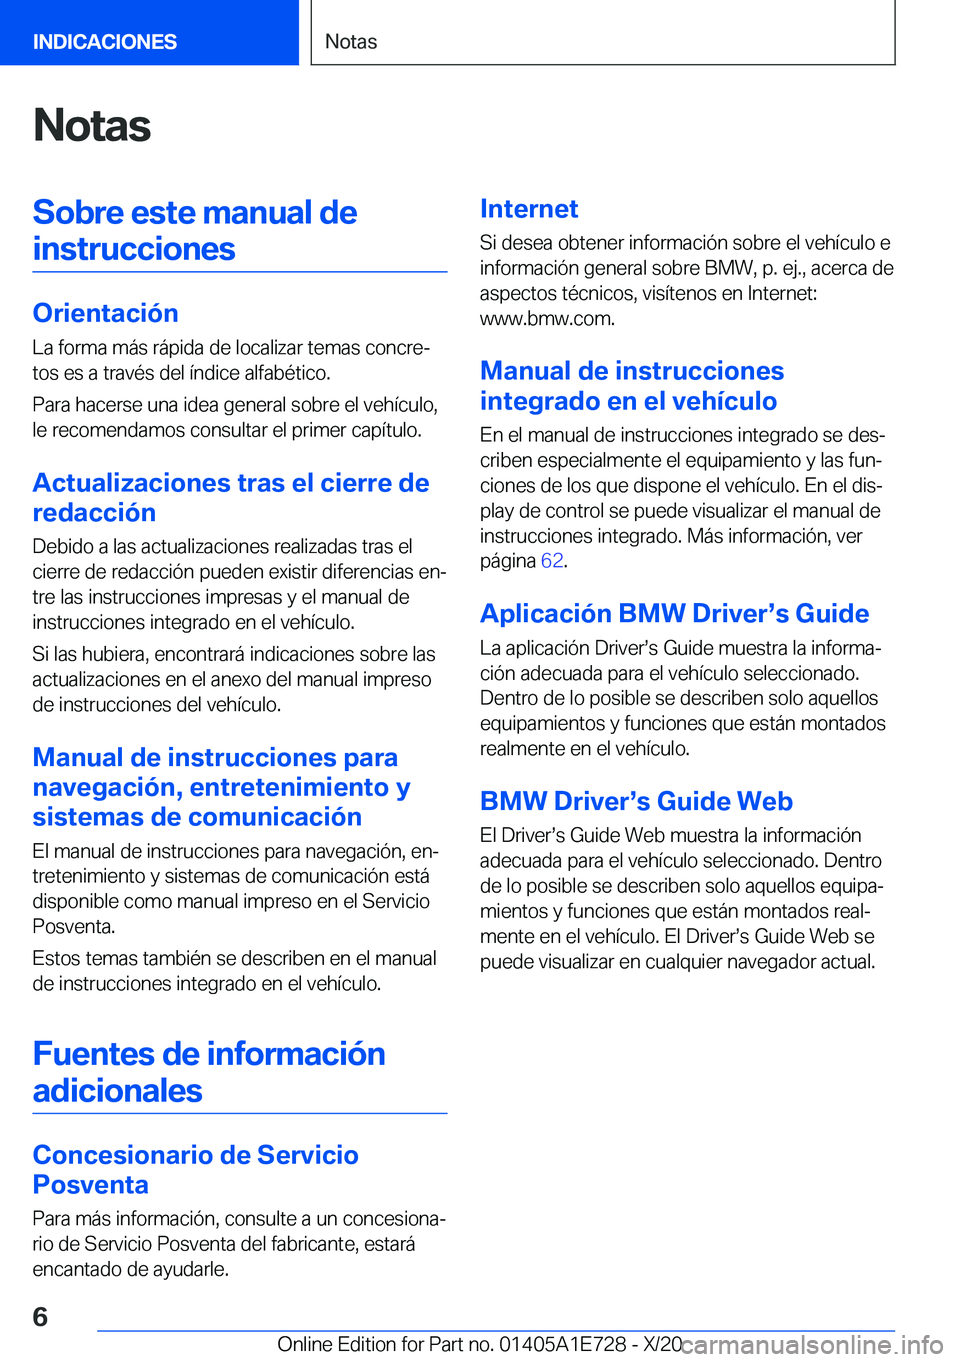 BMW X2 2021  Manuales de Empleo (in Spanish) �N�o�t�a�s�S�o�b�r�e��e�s�t�e��m�a�n�u�a�l��d�e�i�n�s�t�r�u�c�c�i�o�n�e�s
�O�r�i�e�n�t�a�c�i�